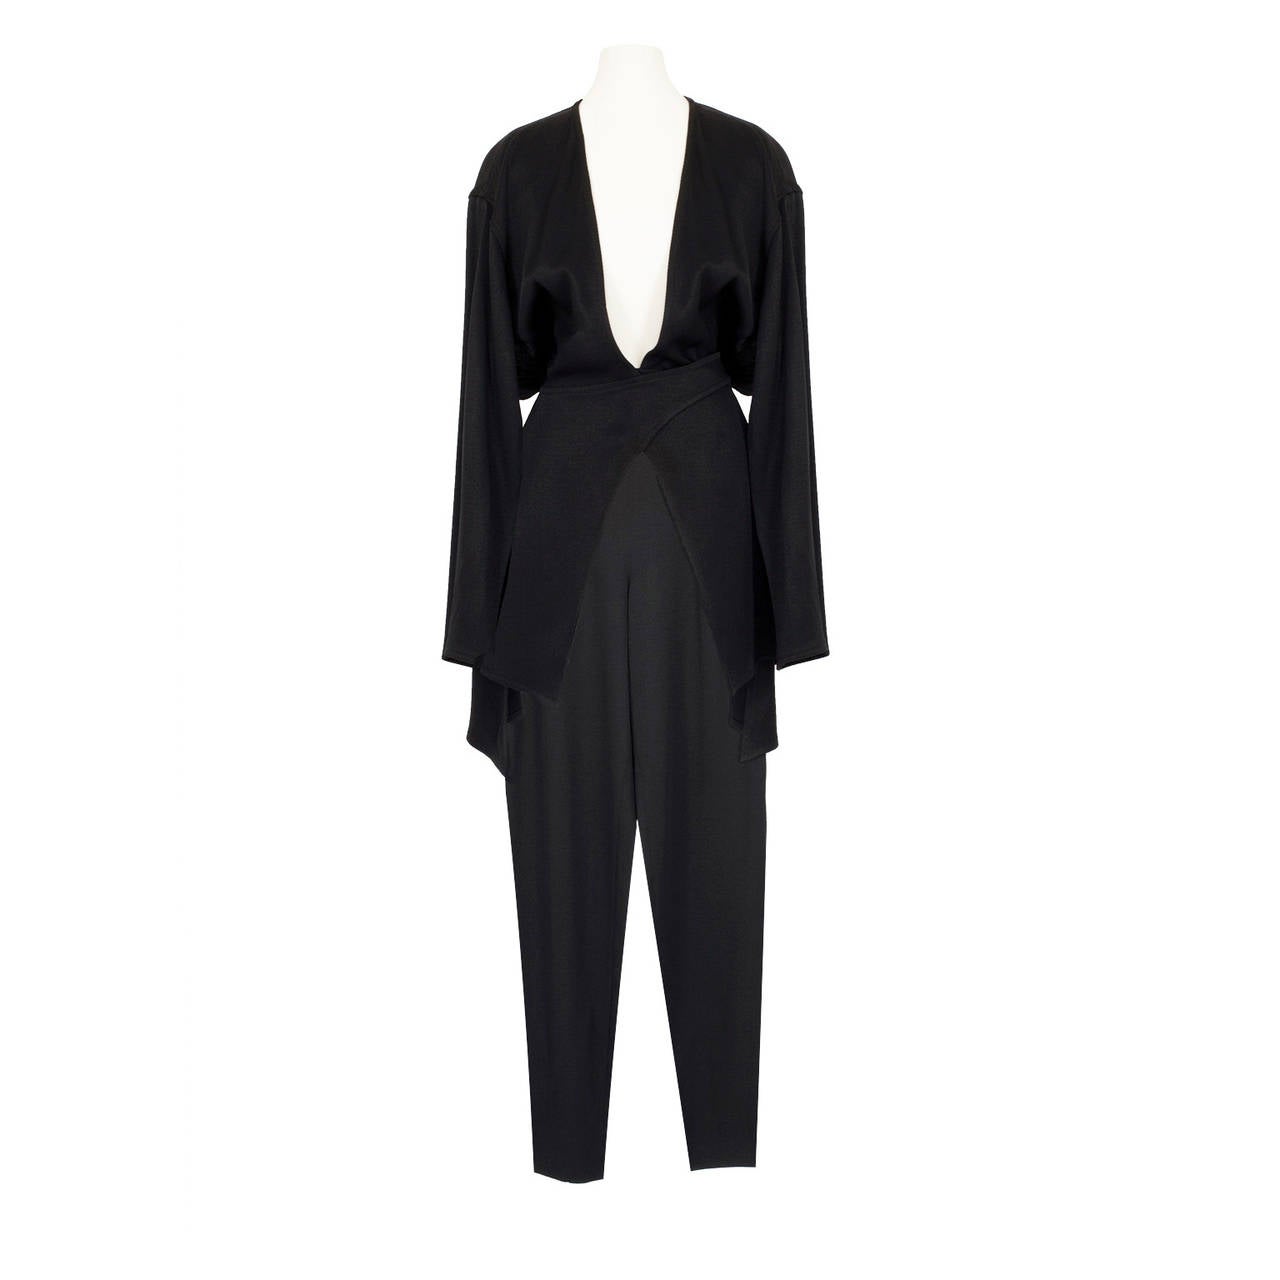 Claude Montana pants suit from 1980's.
The tailored adjustable wrapped and tied Jacket has open back, makes amazing silhouette. The trouser has zipper closure.
Material : Not Specified (Silk Jersey feel)
Sz : 36 EU / 40 Italian
Measurements : Jacket